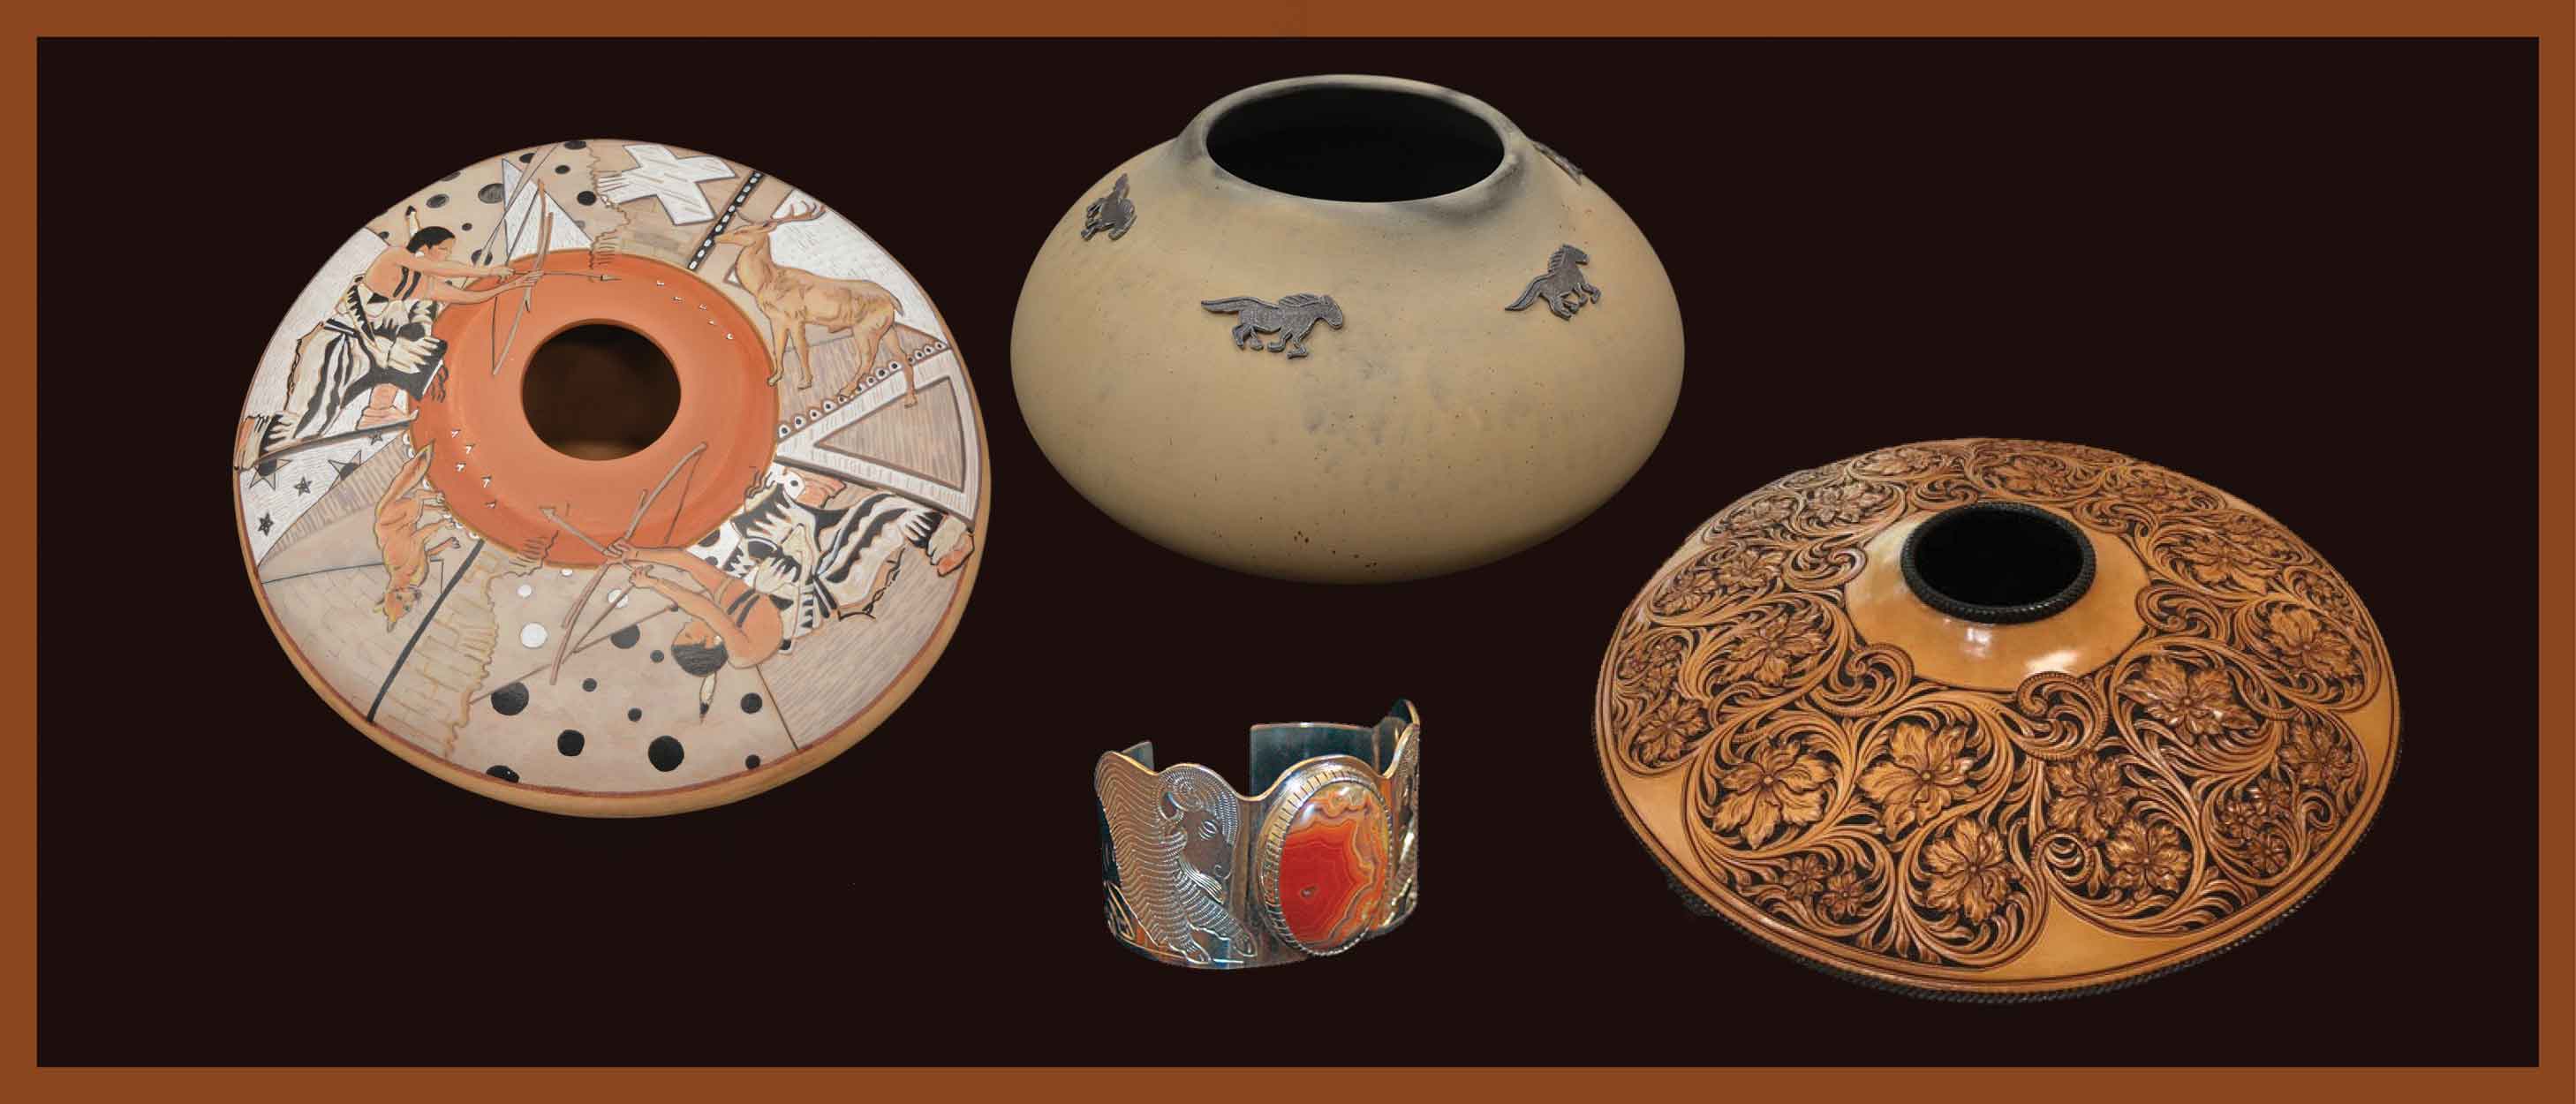 Photo of pottery, a round leather vessel and a silver bracelet with an agate stone.